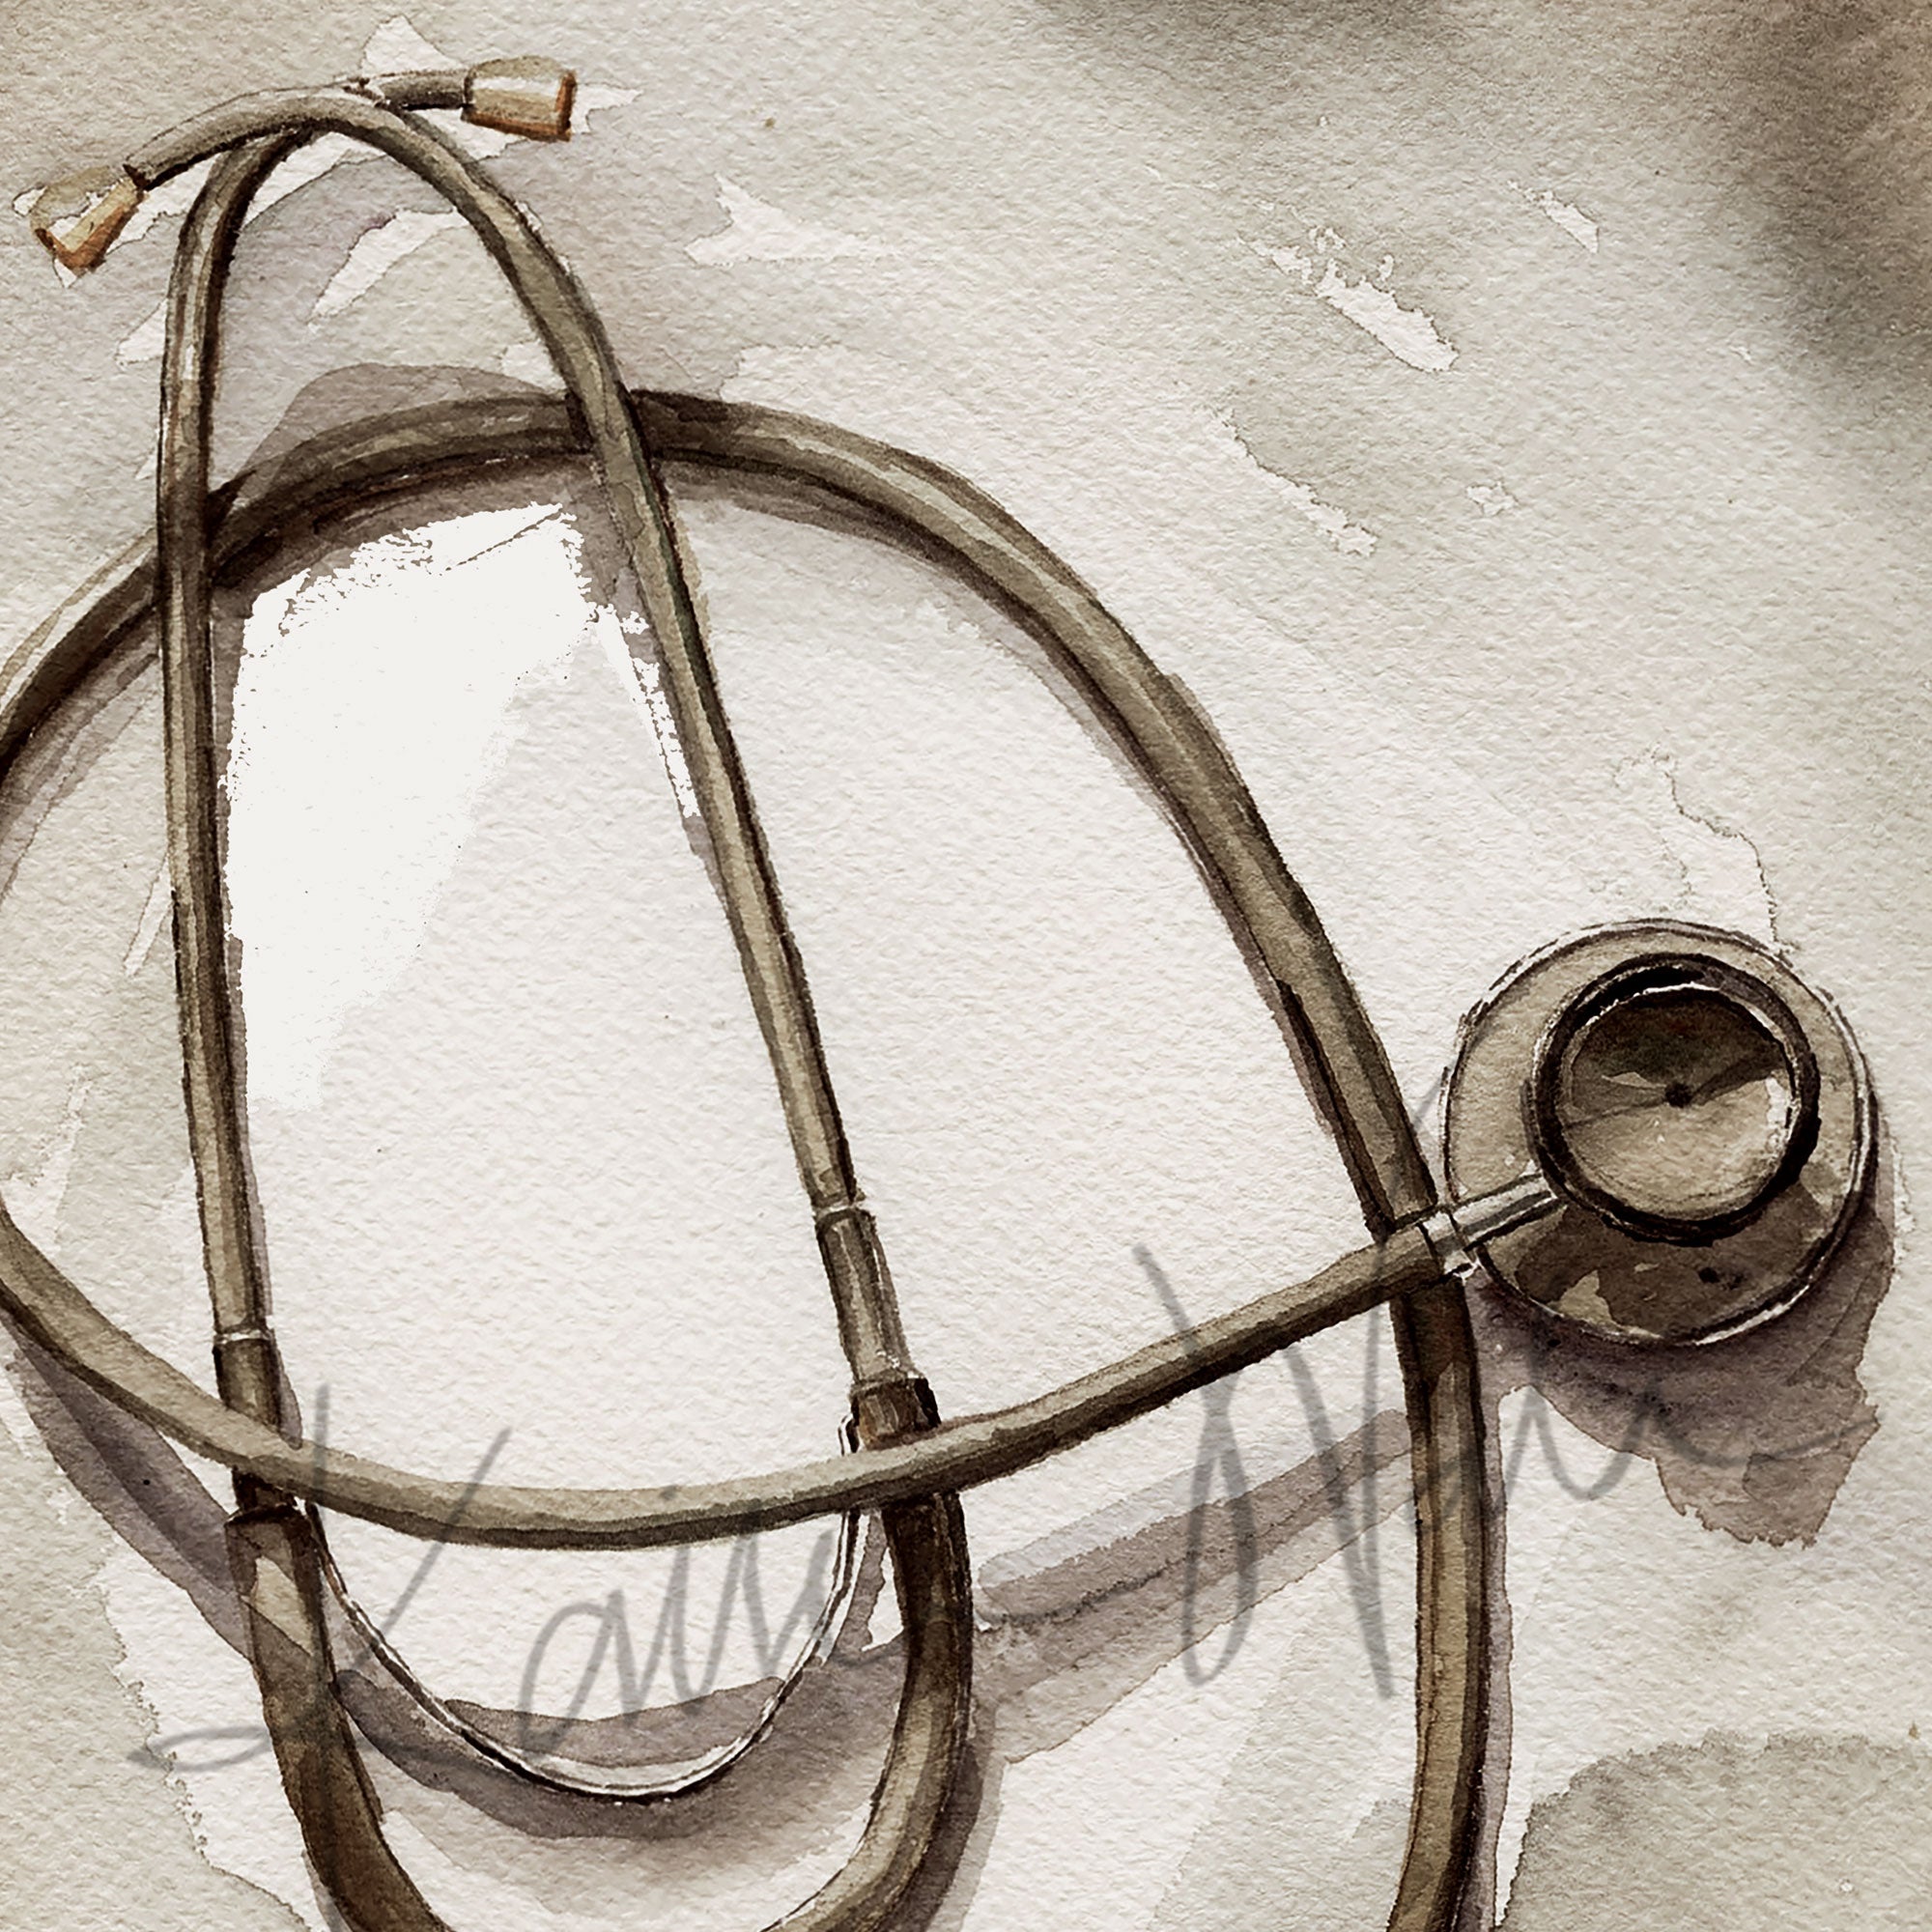 Zoomed in view of a watercolor painting of a Littmann stethoscope with information on it in an antique style